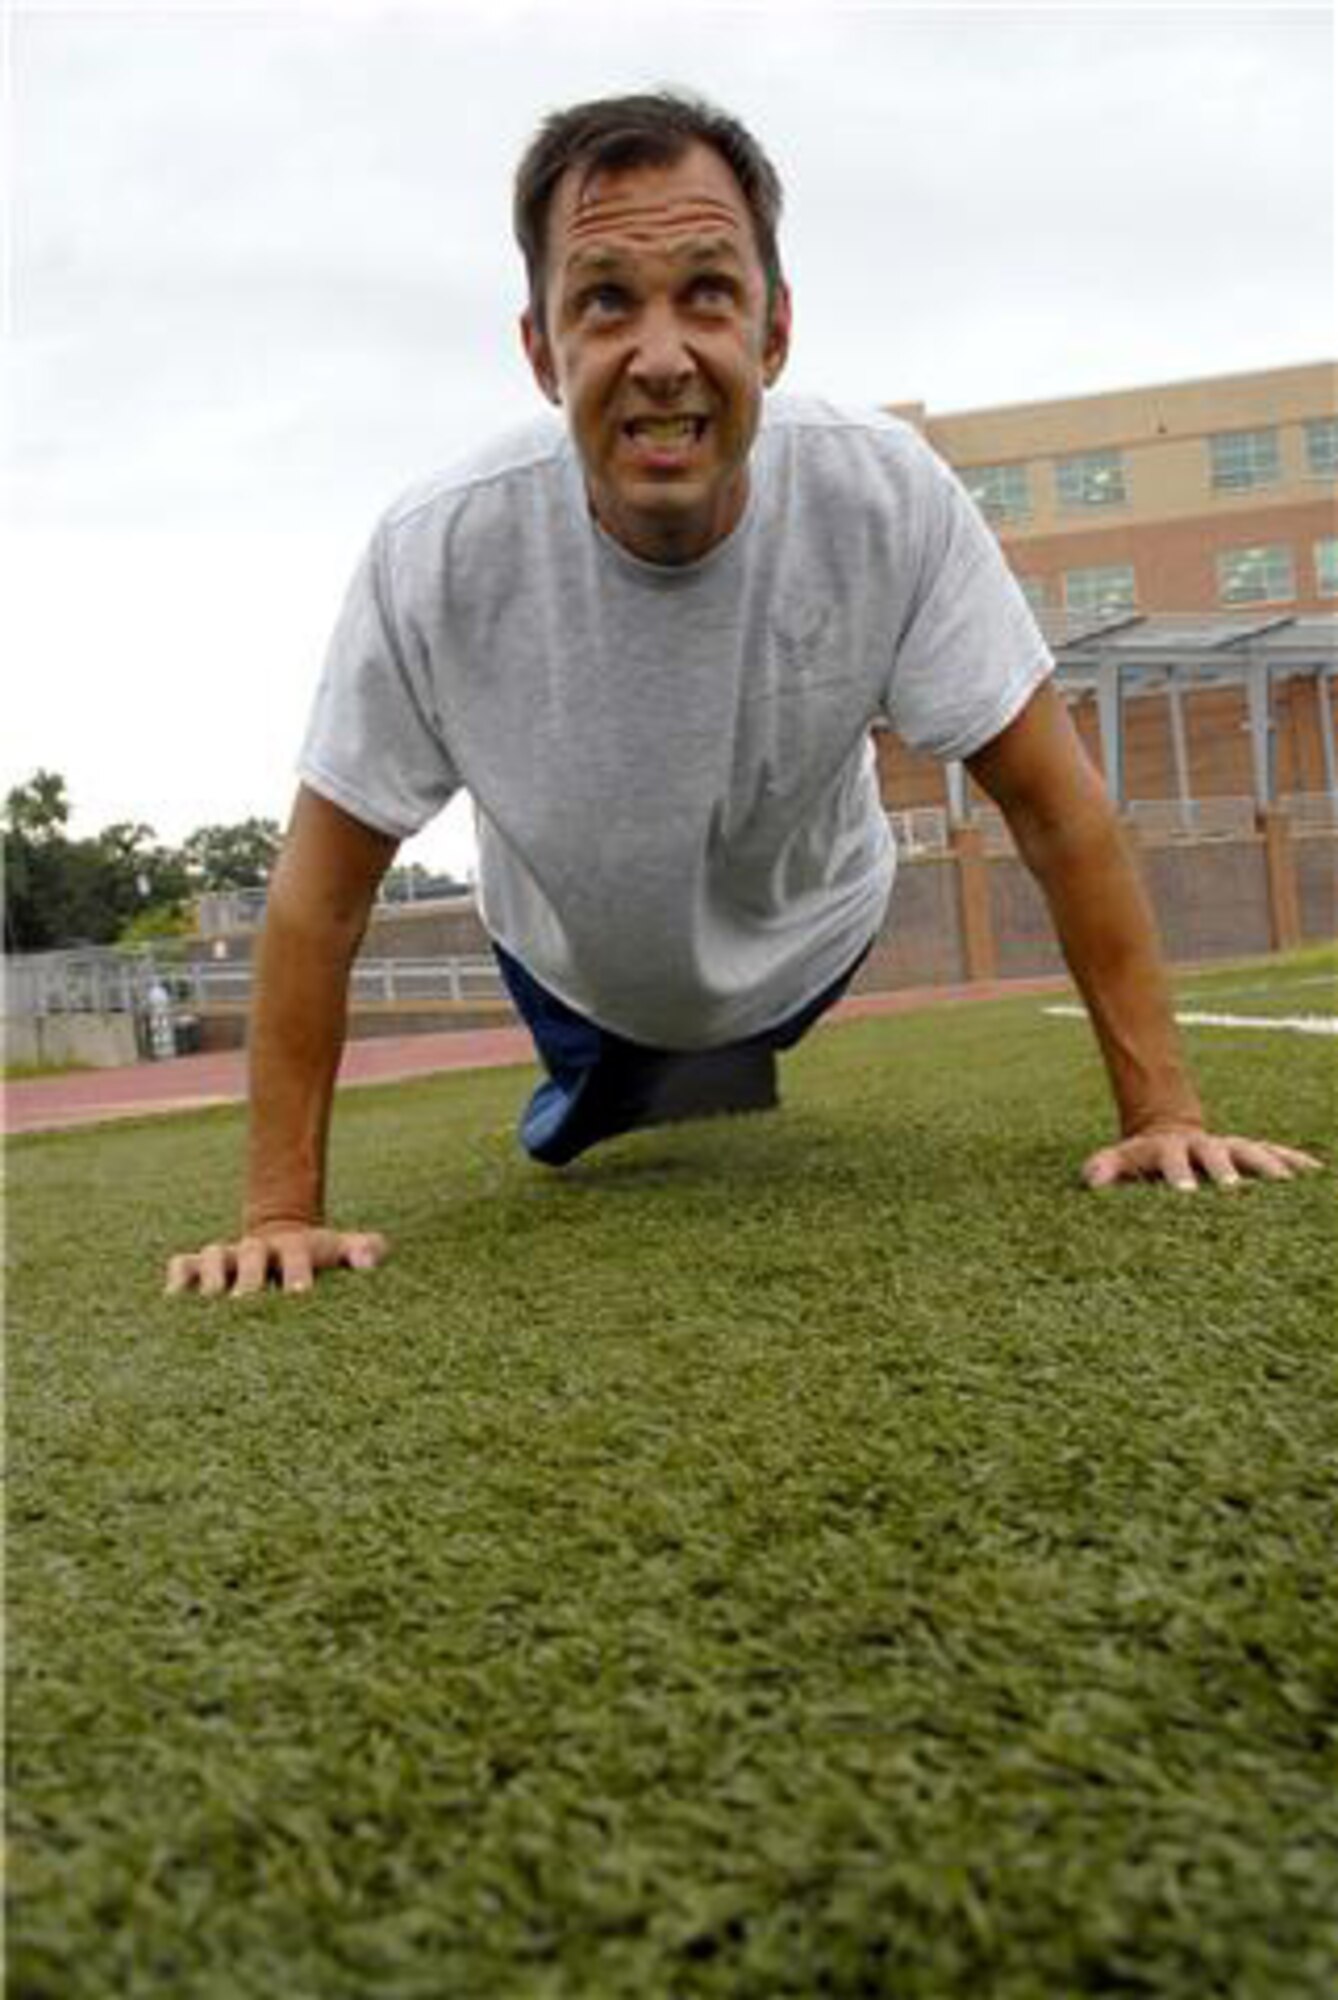 Senior Master Sgt. Kenneth Holcomb performs pushups for his fitness test, Sept. 8, 2009, in Washington, D.C. Although he needed to do 40 pushups to pass that portion of the test, Sergeant Holcomb did 50 and earned a perfect score. Sergeant Holcomb is the Air Force Public Affairs Agency media center superintendent. (U.S. Air Force photo/Tech. Sgt. Timothy O'Bryan) 